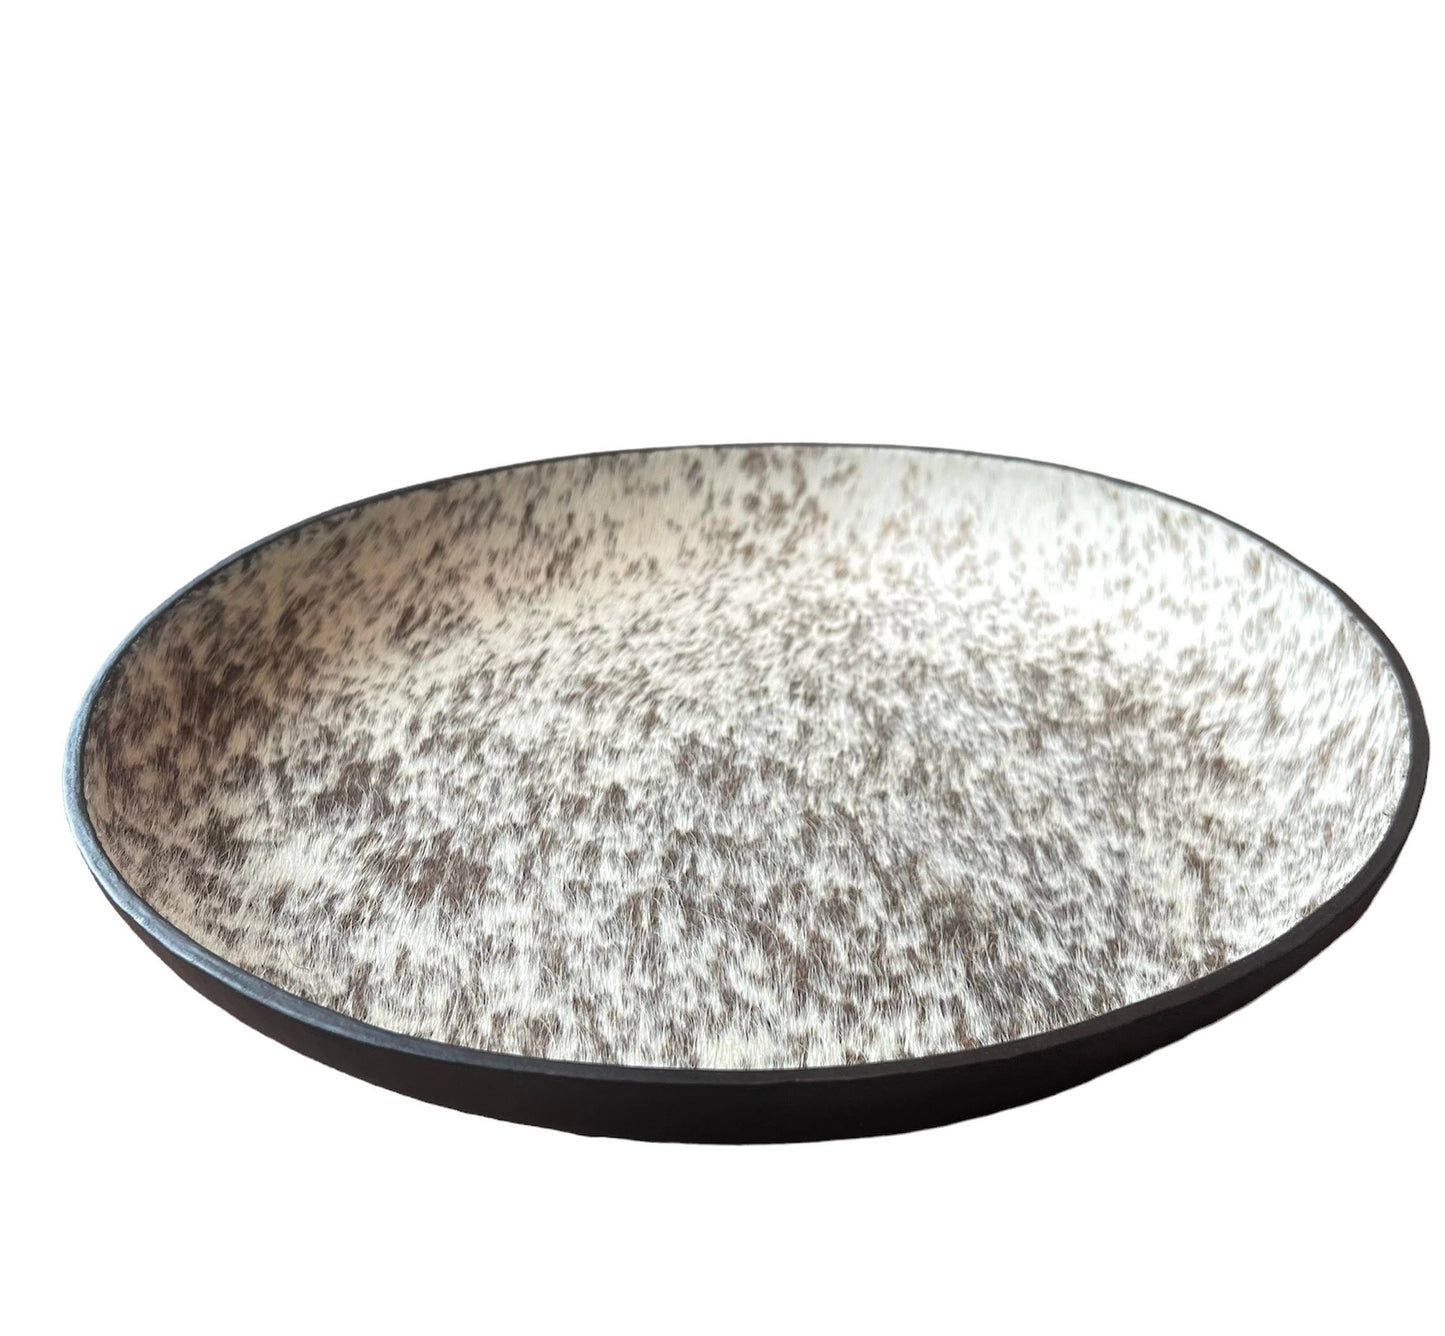 LIMITED EDITION COWHIDE BOWL